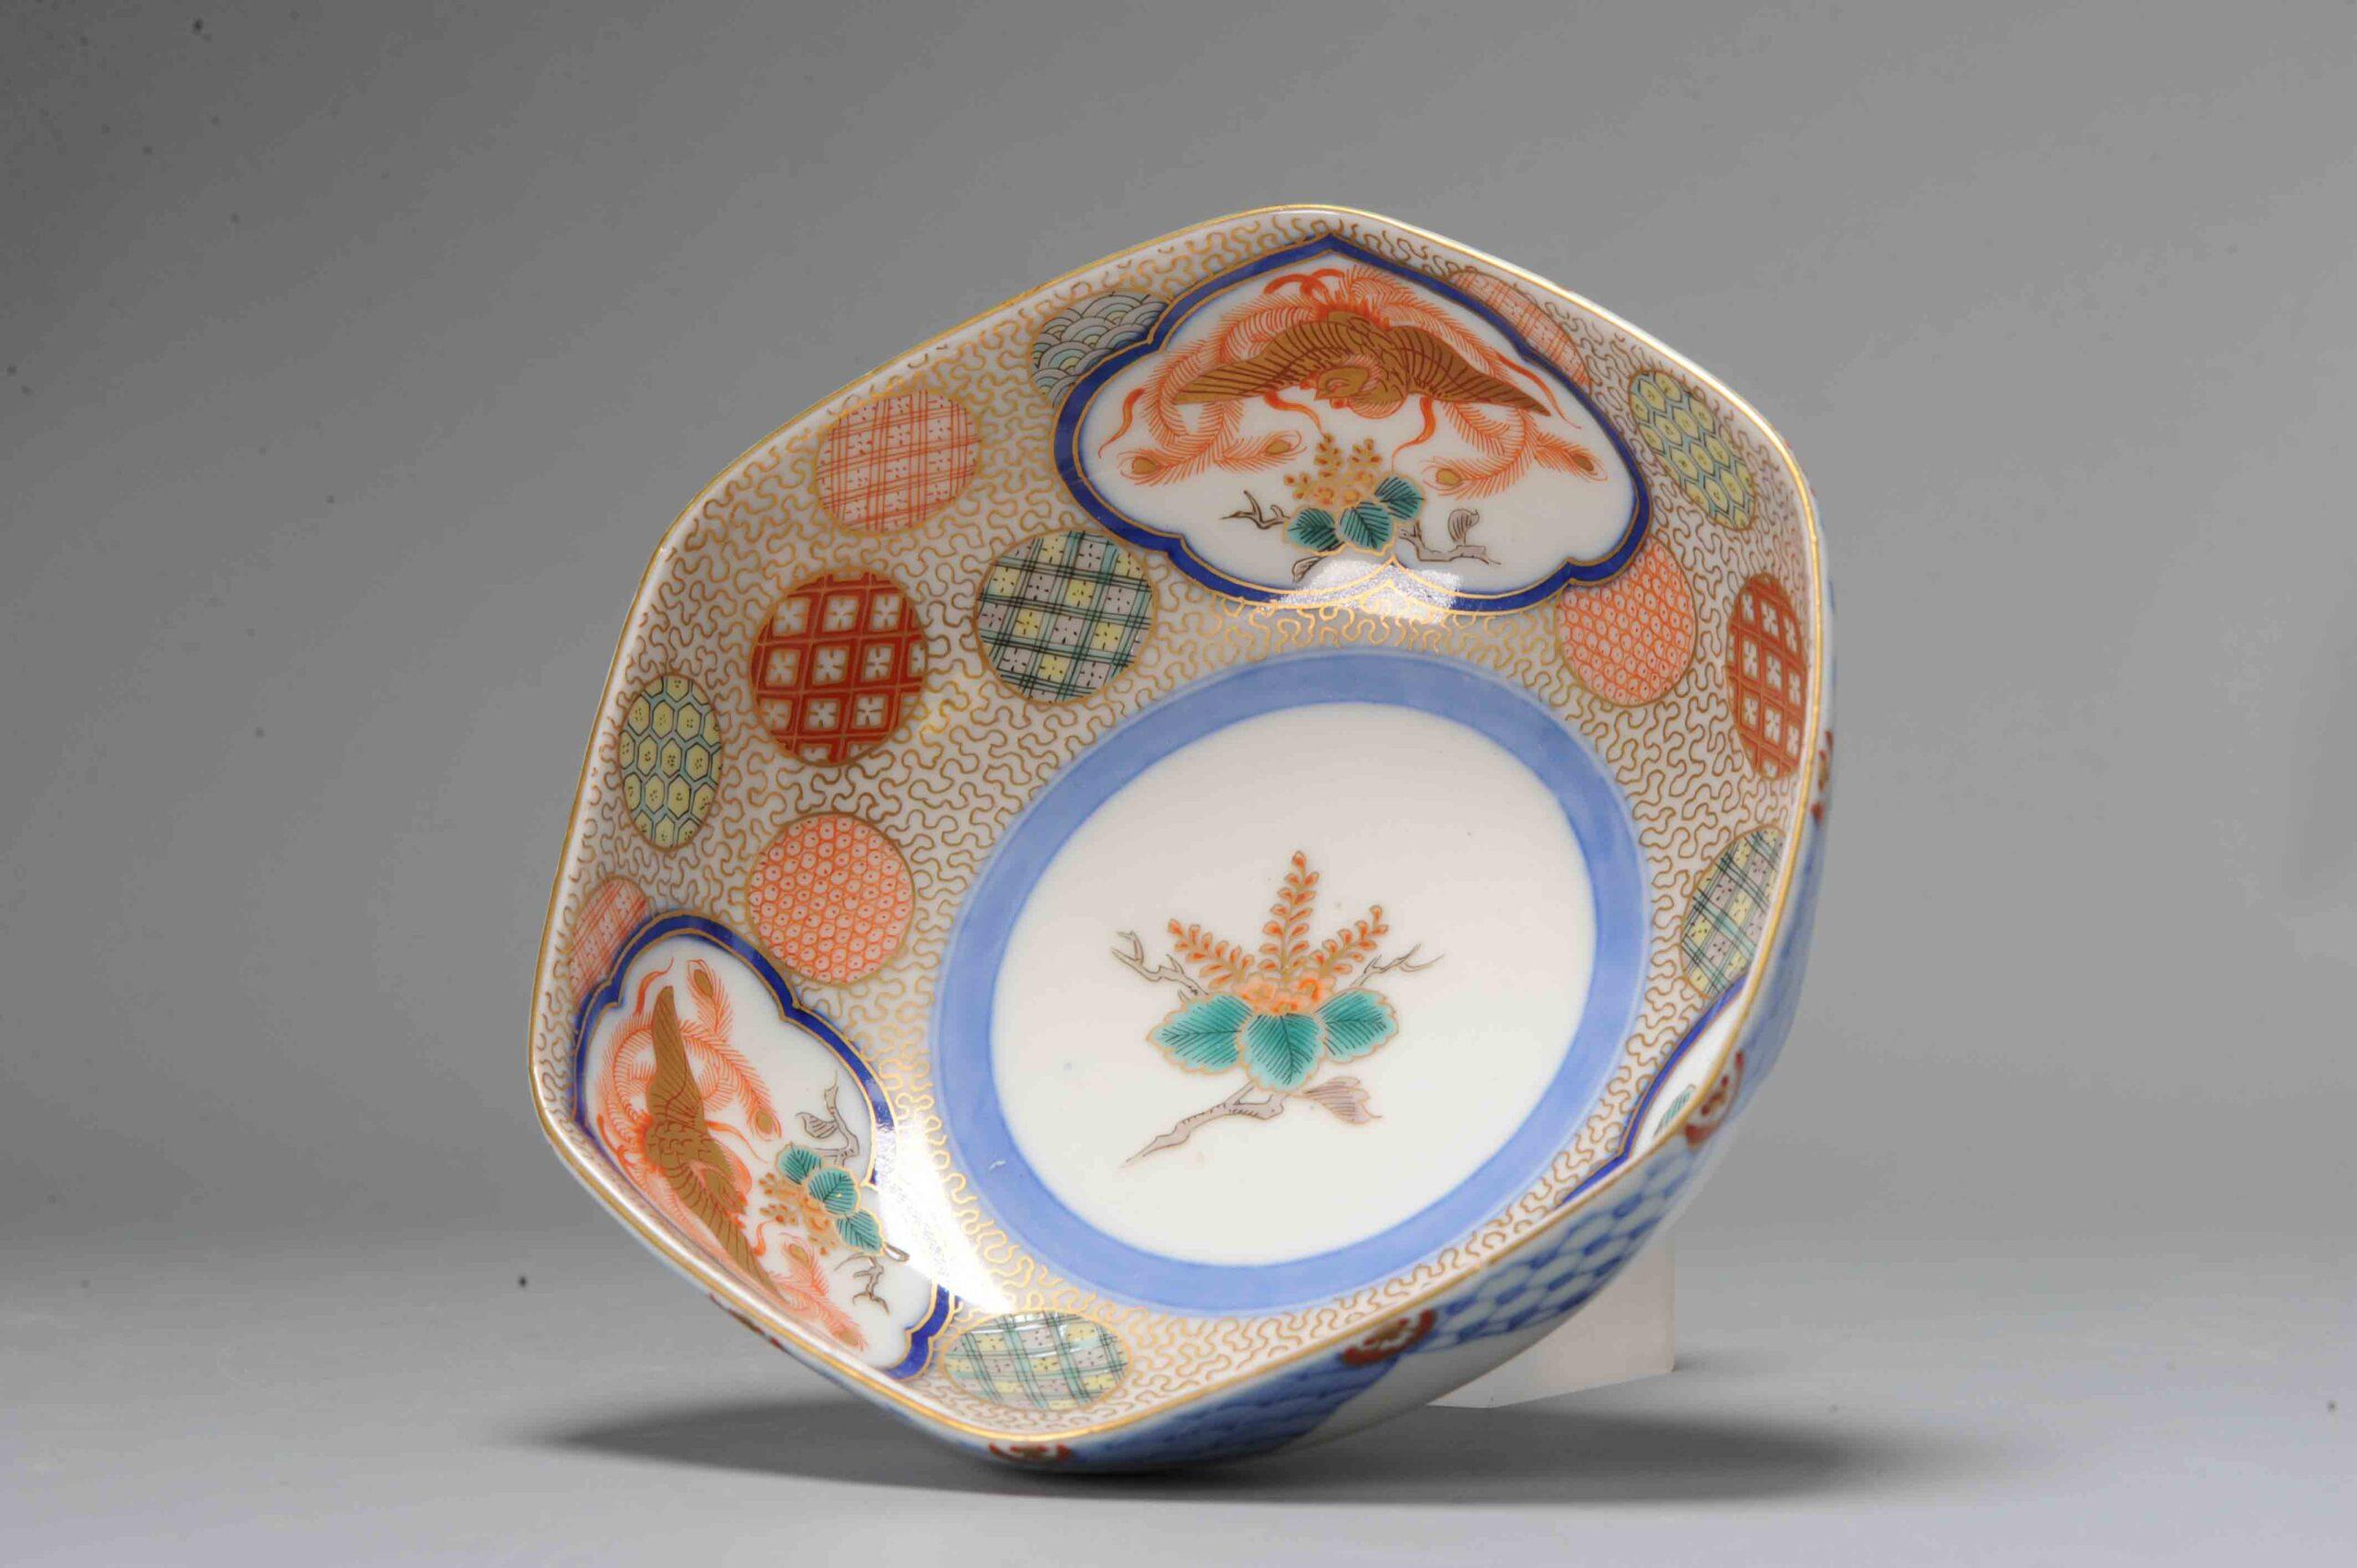 Antique Japanese Porcelain Meiji Period Bowl Floral Imari In Excellent Condition For Sale In Amsterdam, Noord Holland